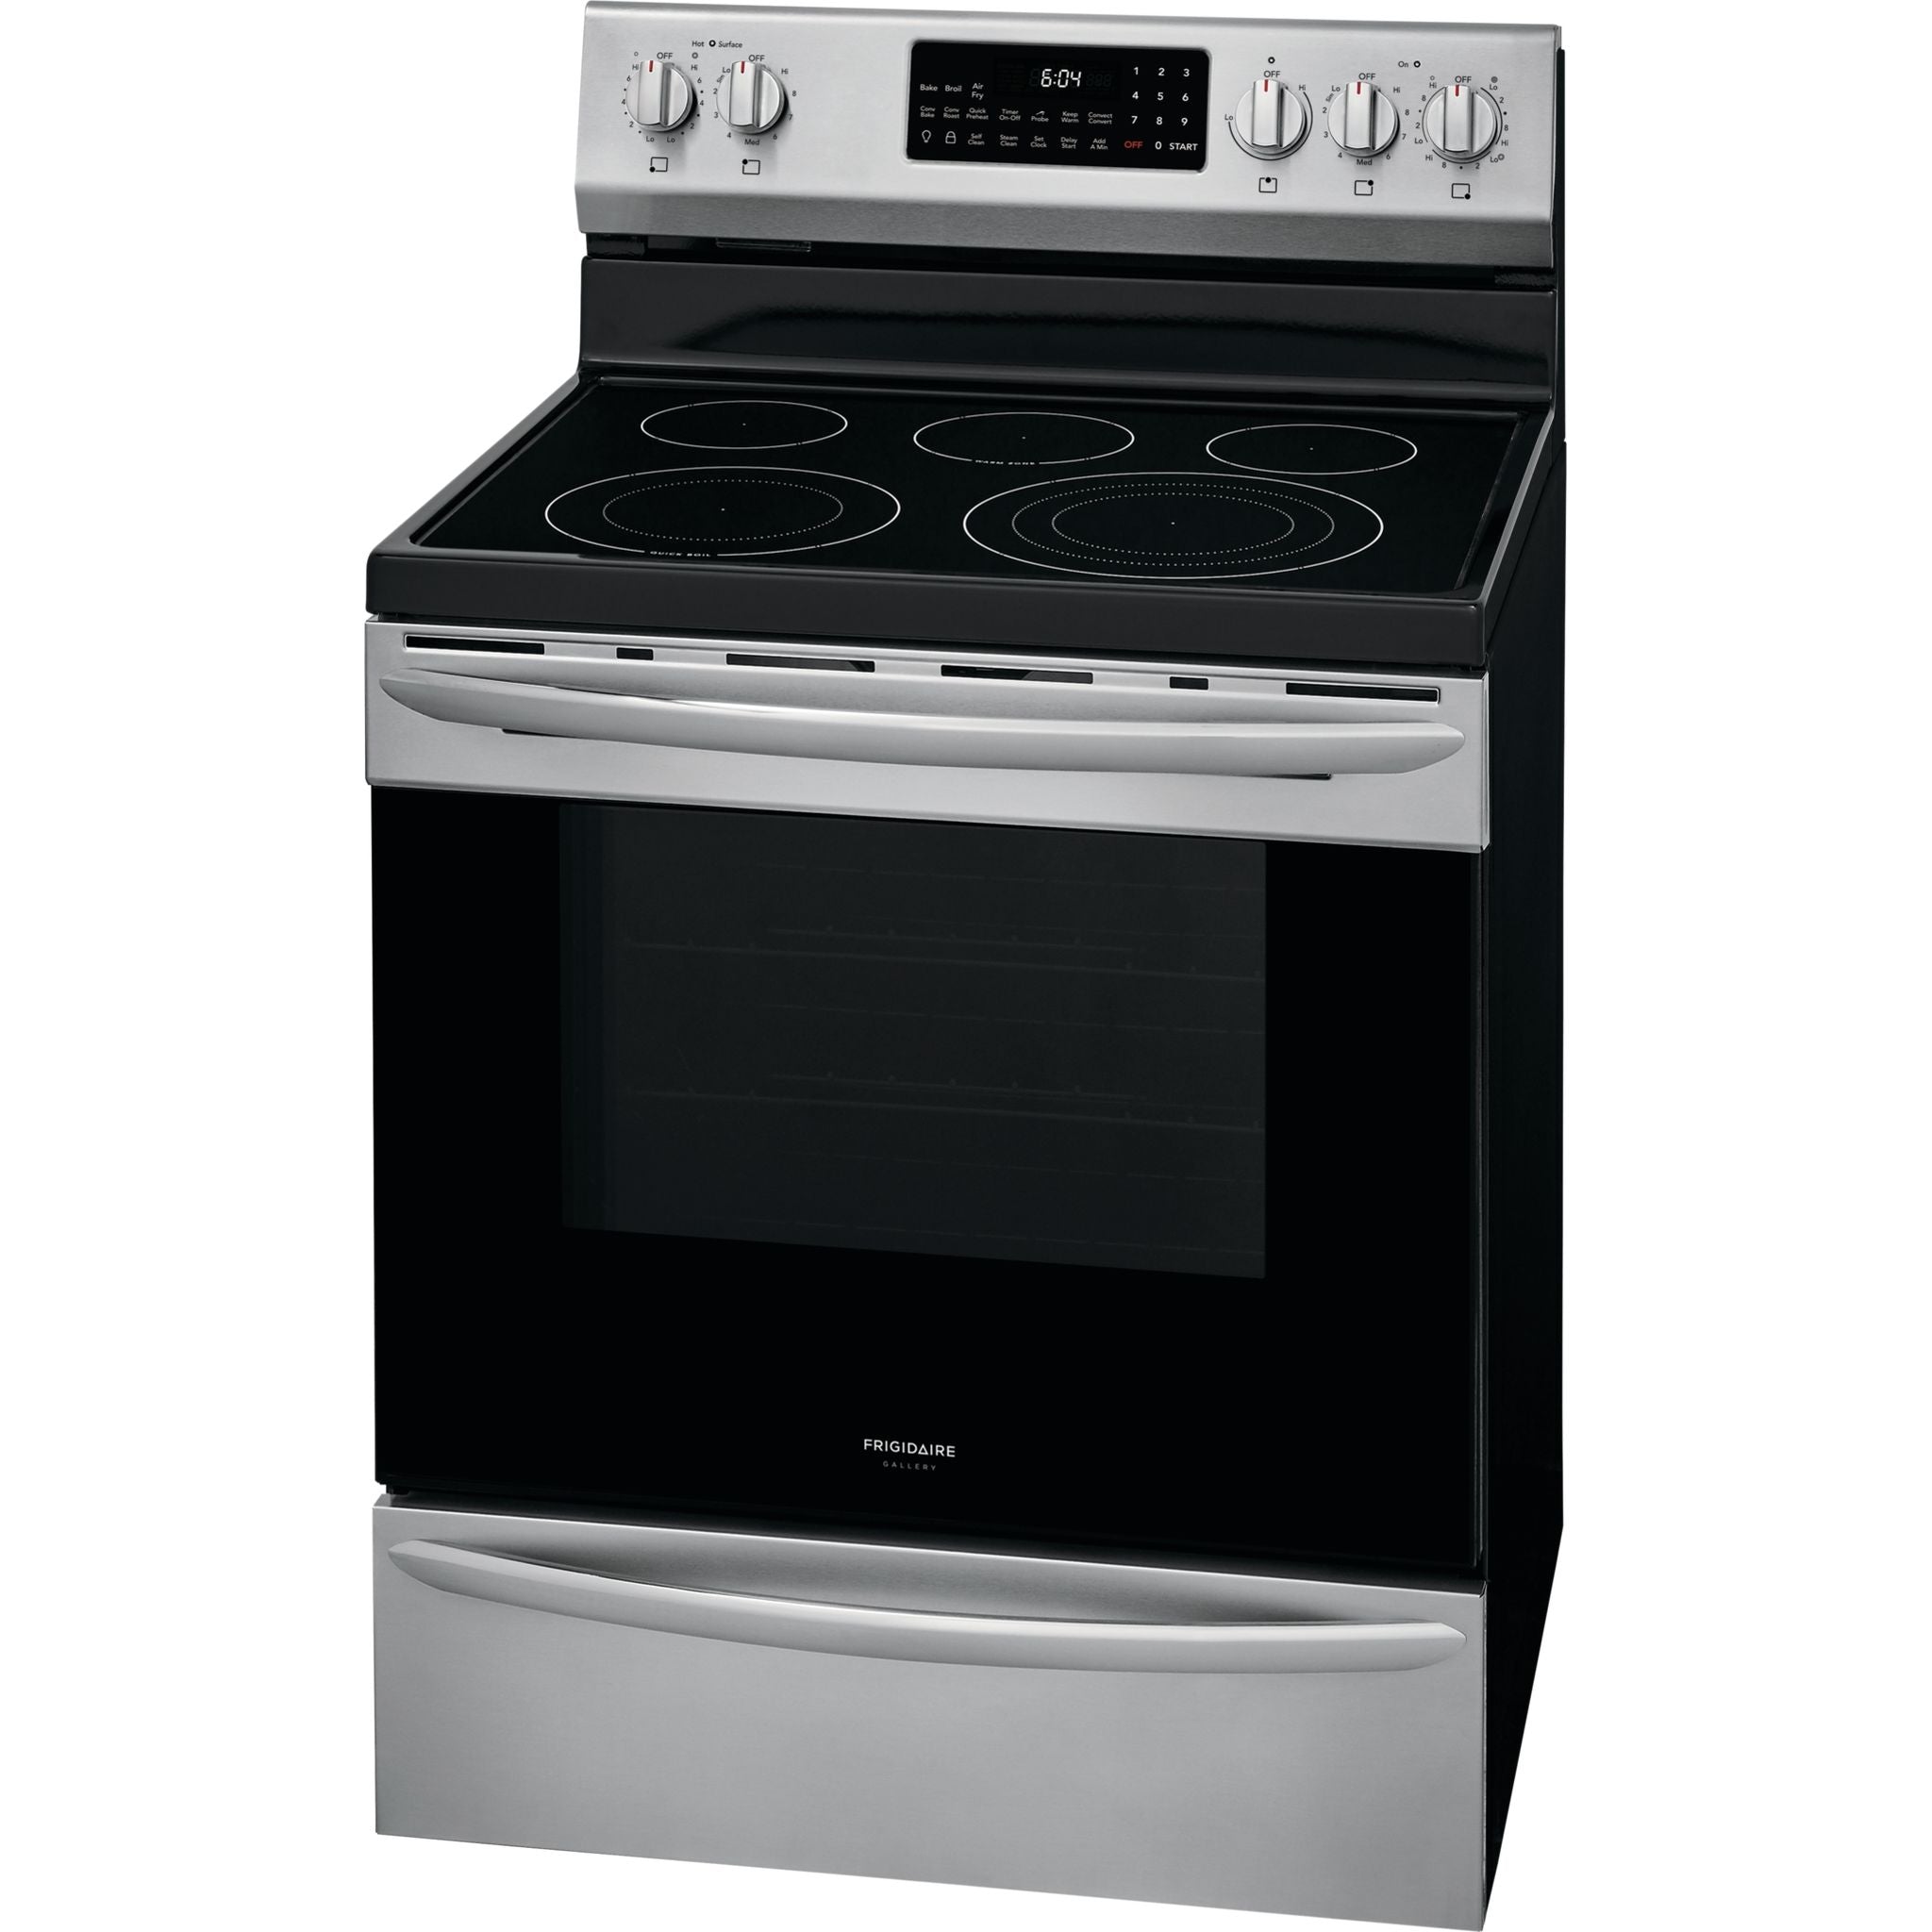 Frigidaire Gallery, Frigidaire Gallery 30" Electric Range (GCRE306CAF) - Stainless Steel